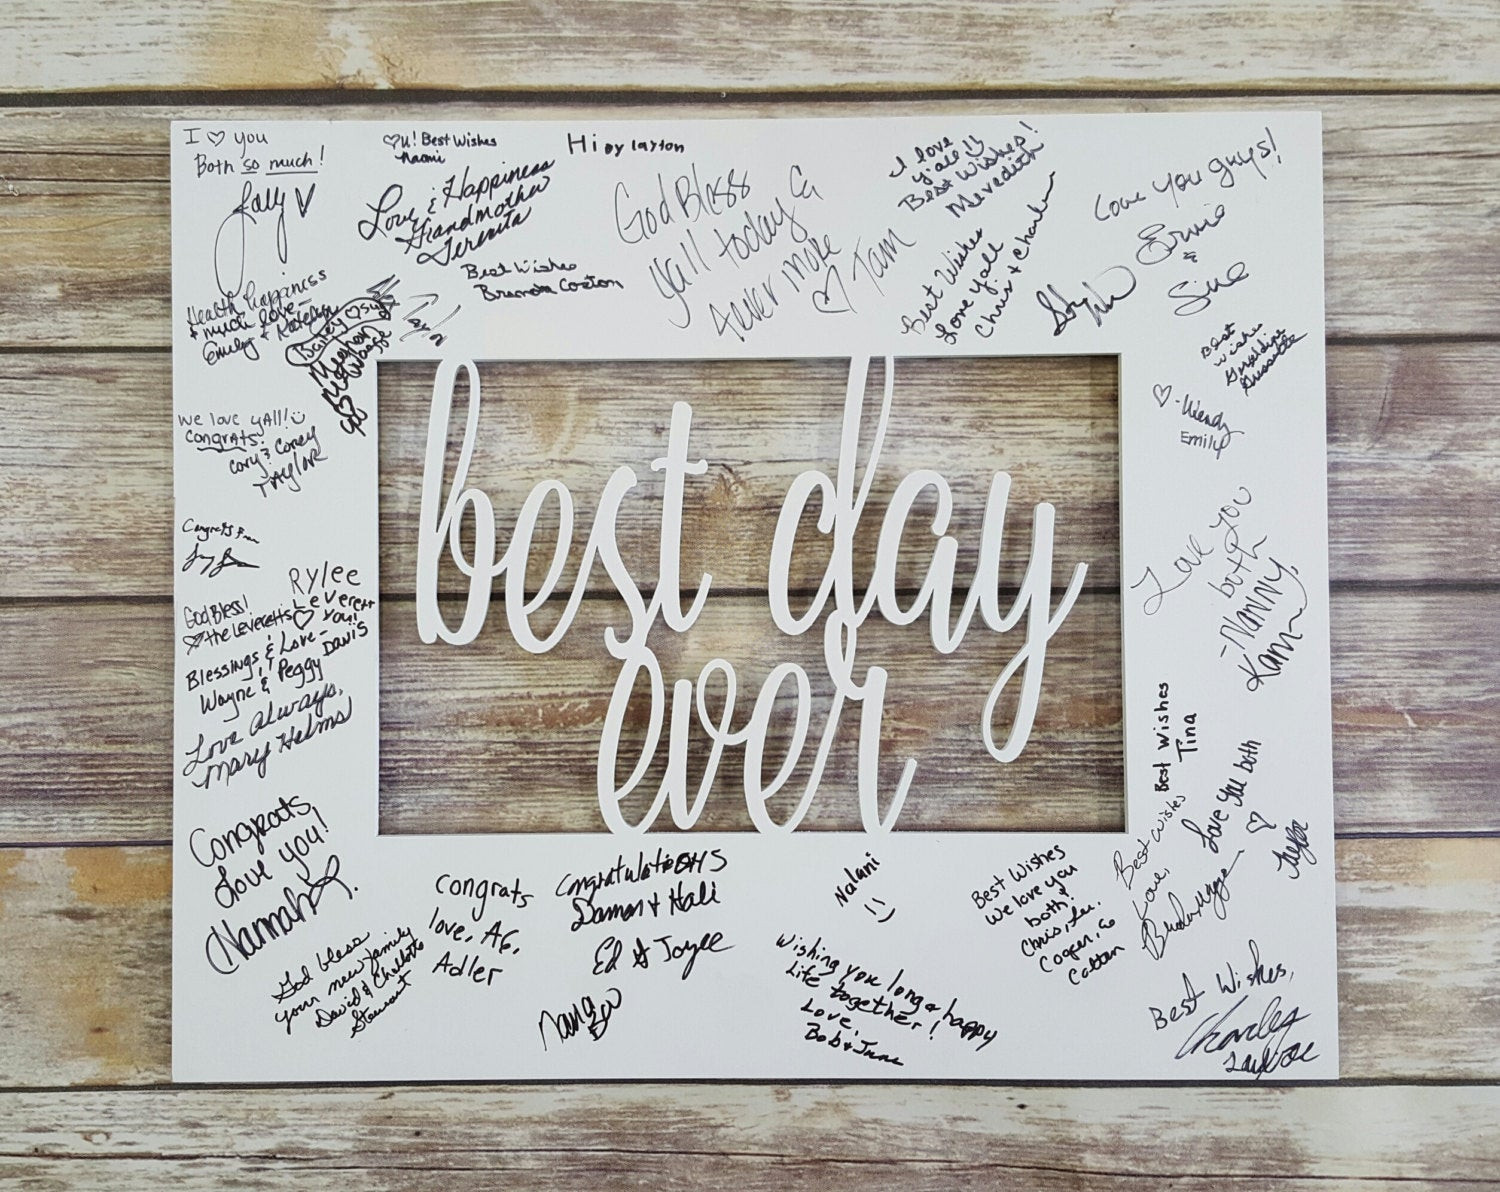 Best Wedding Guest Book
 Best Day Ever Wedding Guest Book Painted Wooden Sign